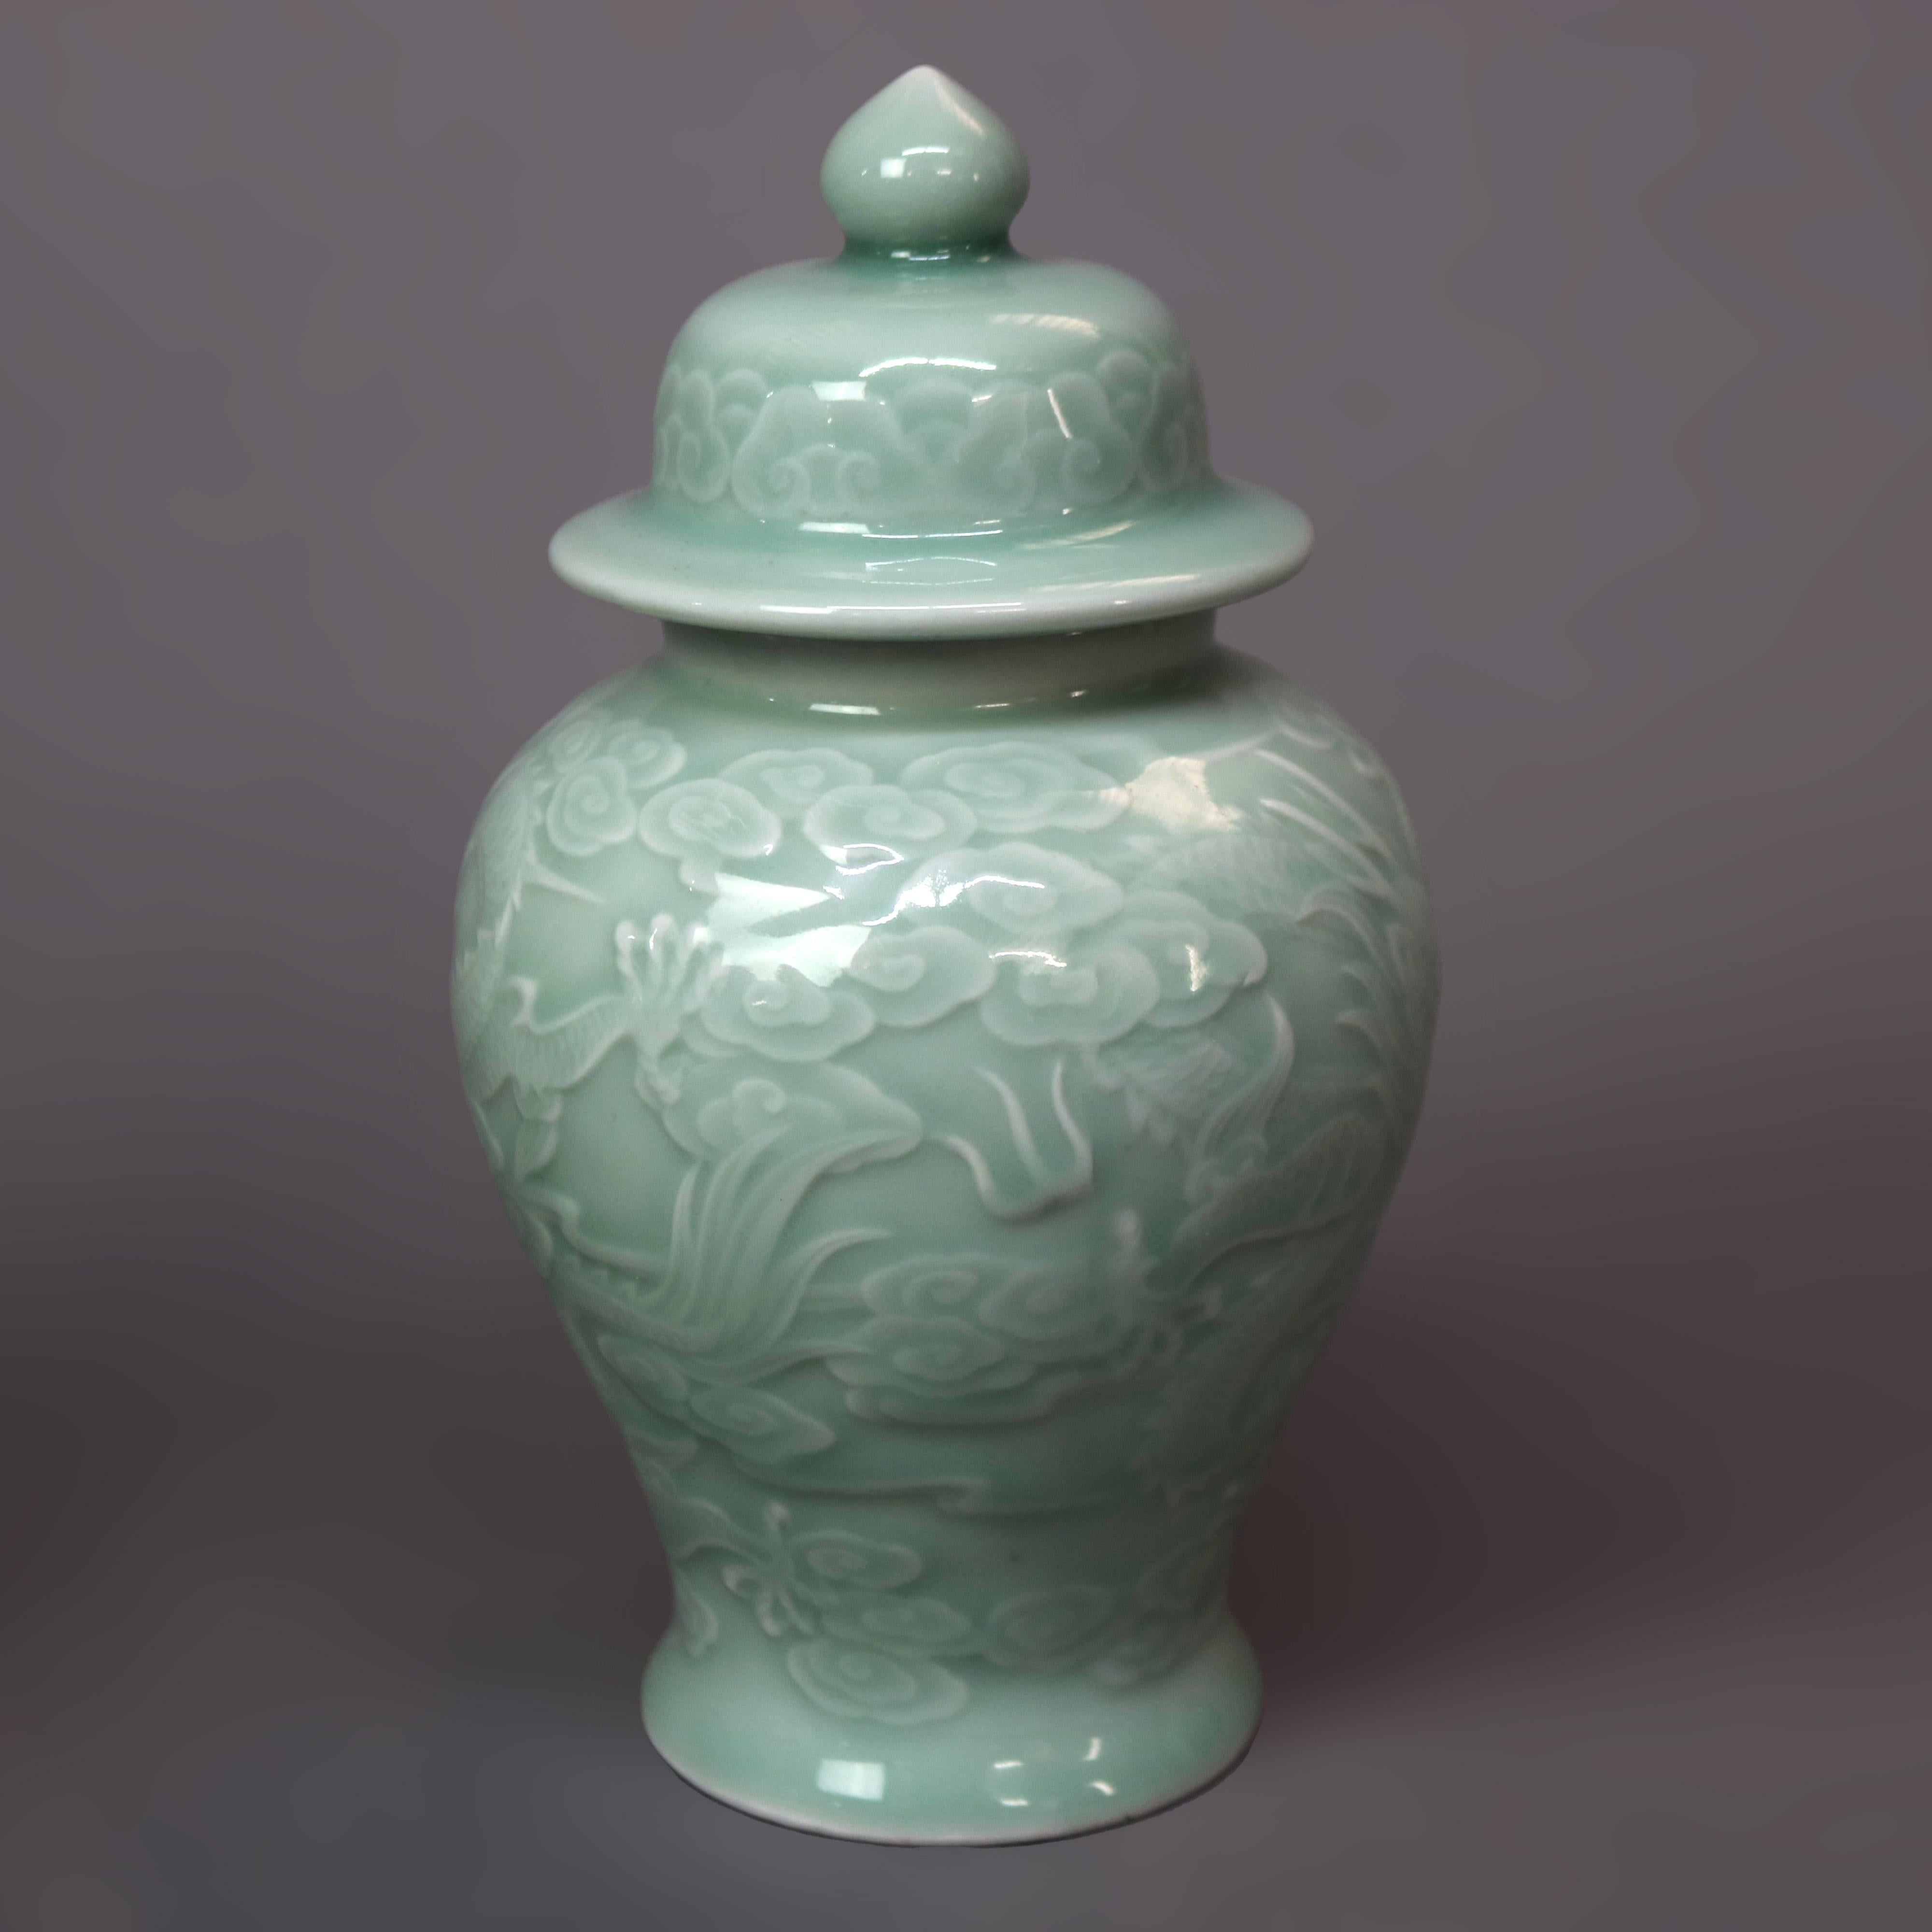 A pair Chinese porcelain celadon lidded urns feature dragon design, 20th century.

Measures - 8.25